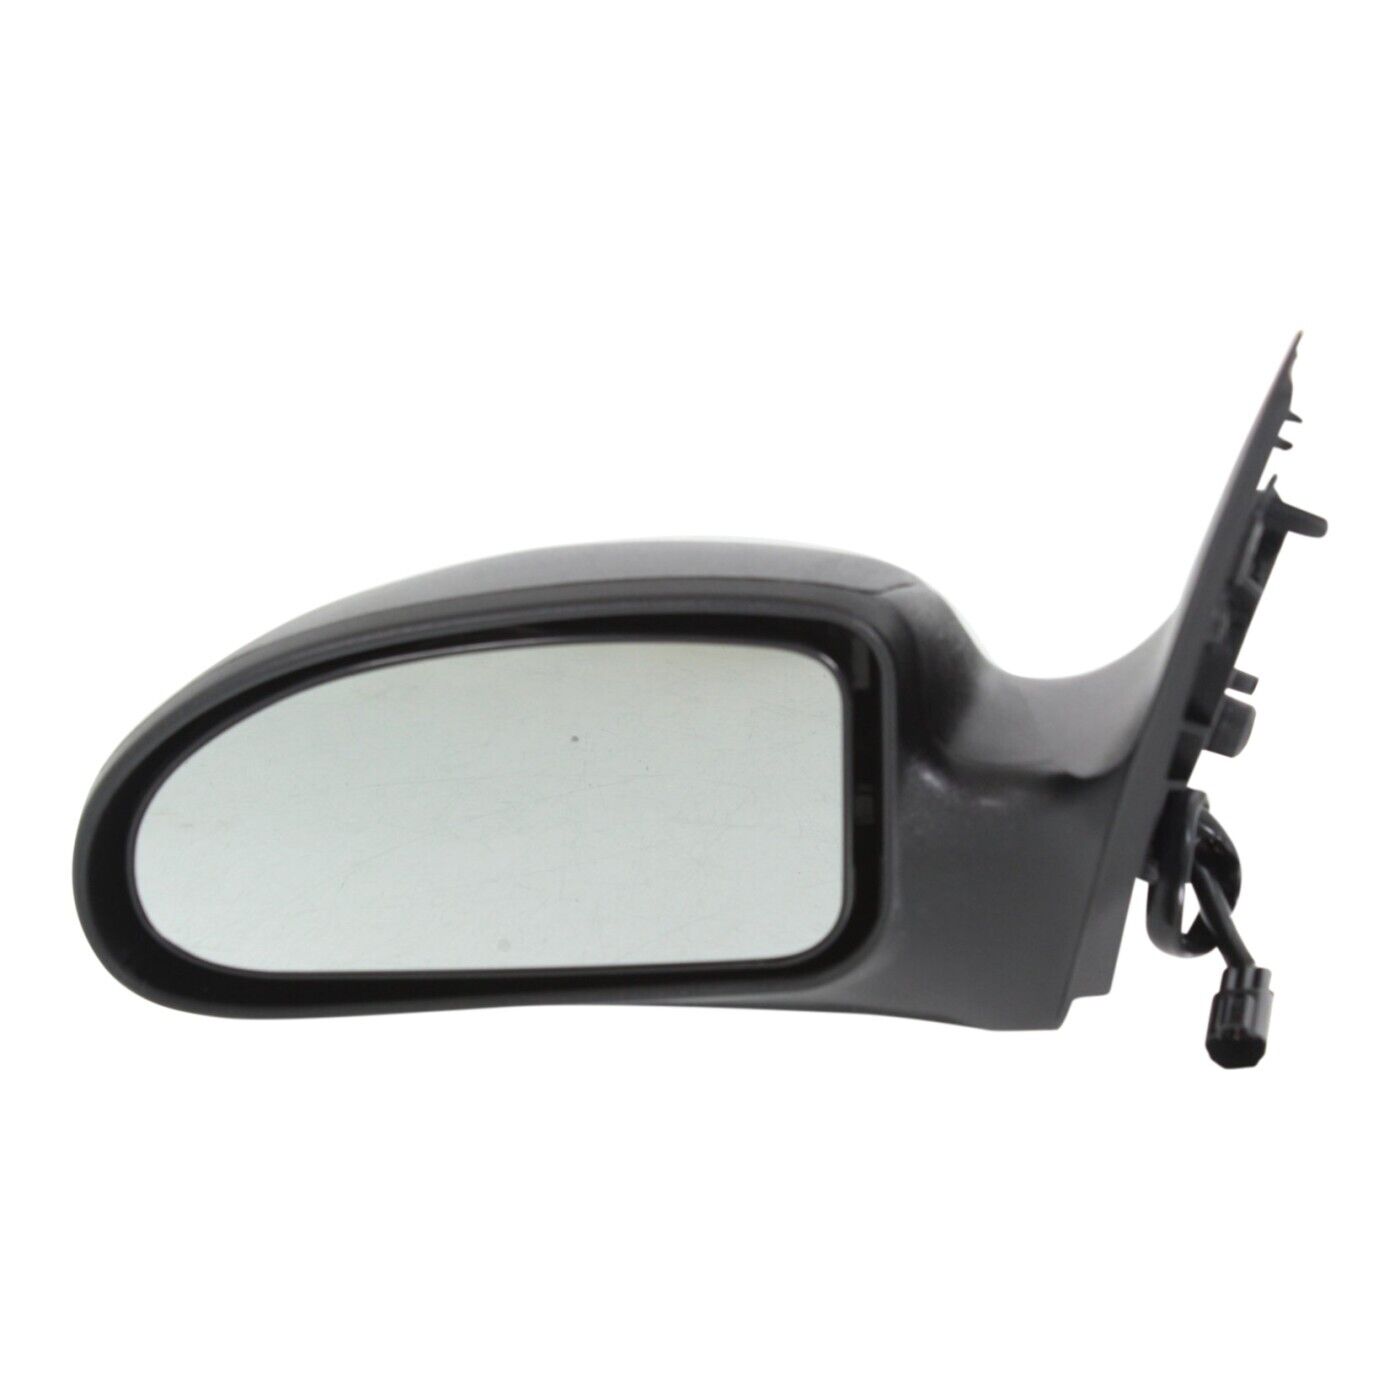 Power Mirror For 2000-2007 Ford Focus Front Driver Side Textured Black